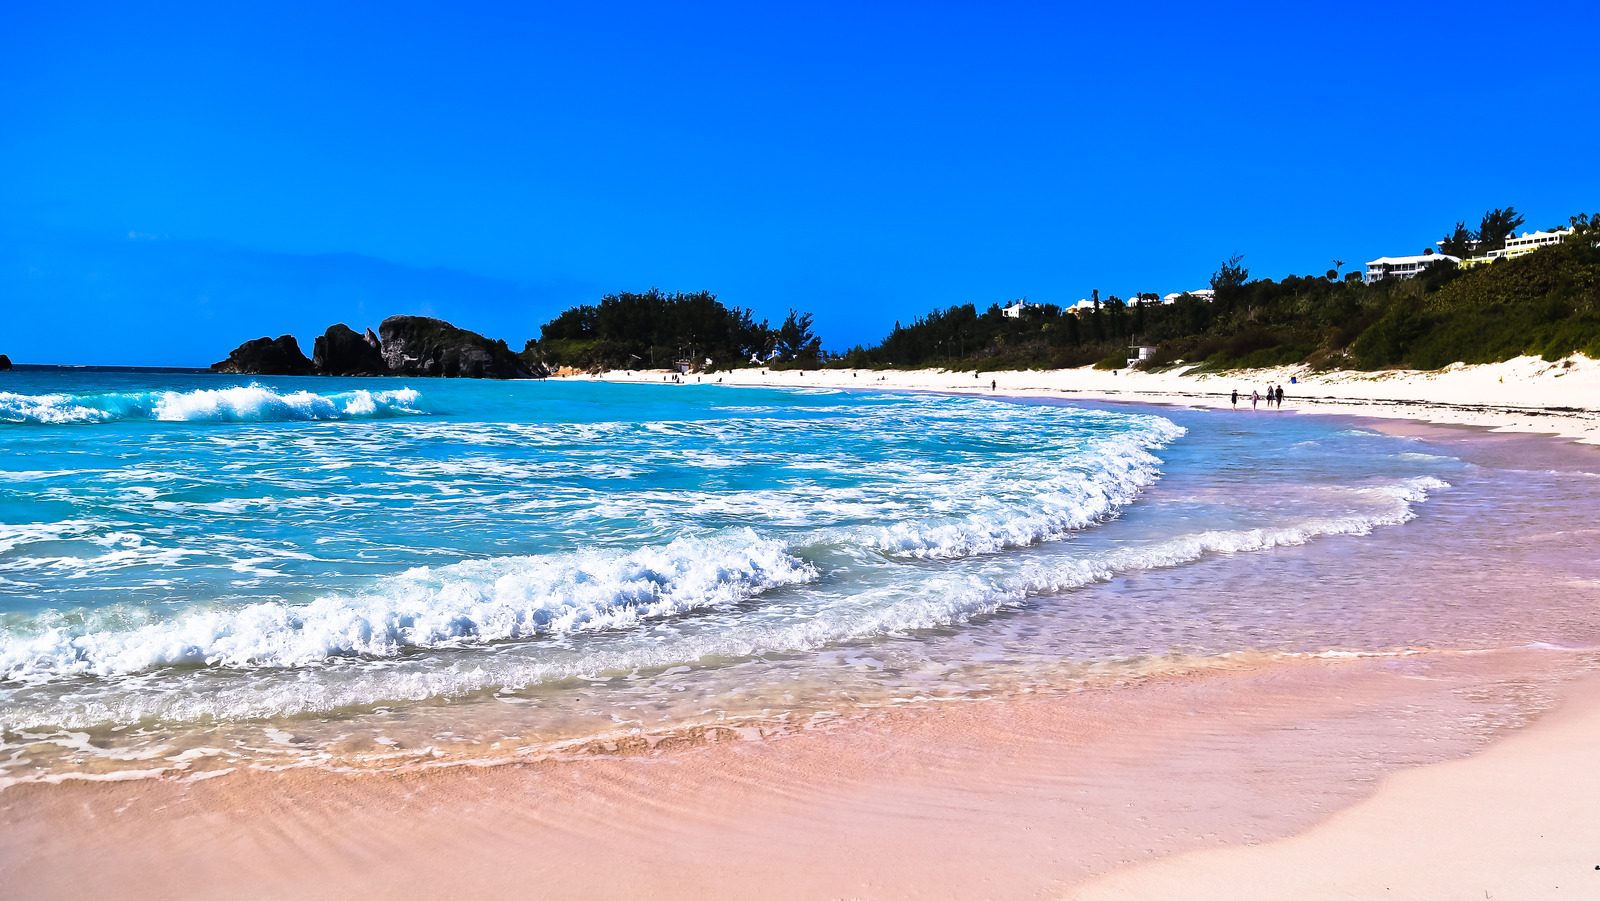 Take In Beautiful Crystal Clear Water And Pink Sand Views At This Popular  Bermuda Beach